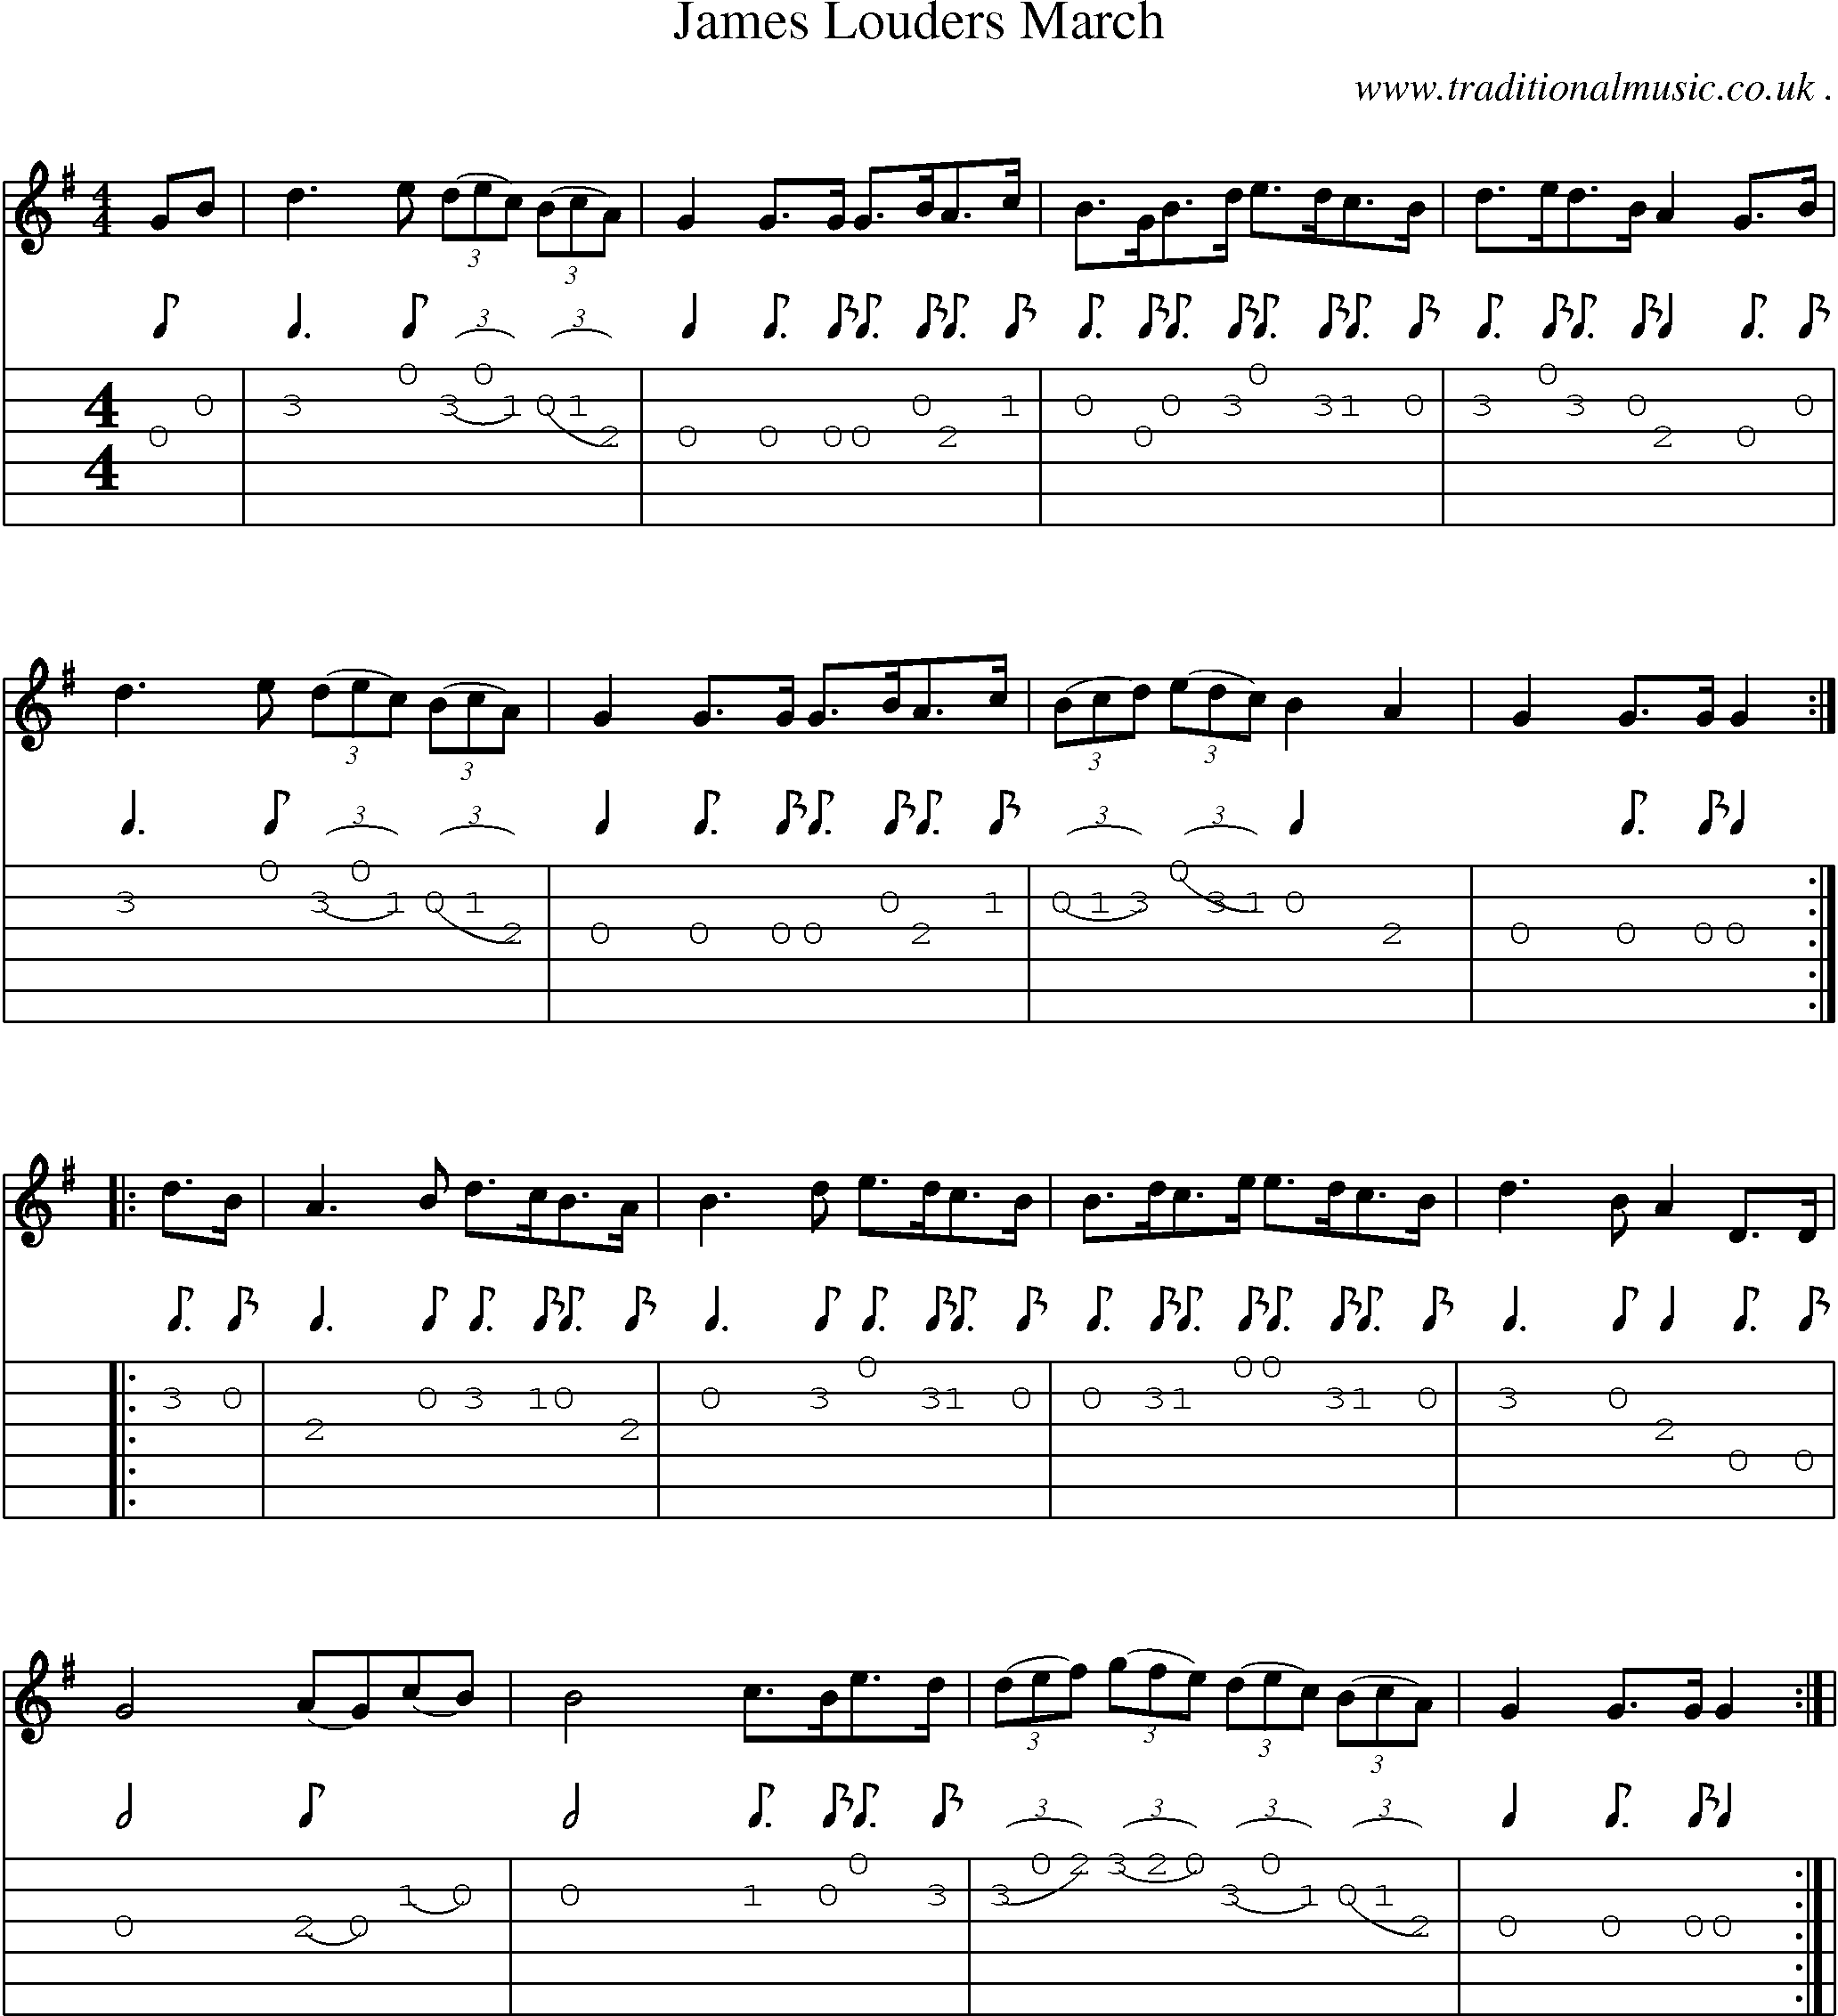 Sheet-Music and Guitar Tabs for James Louders March